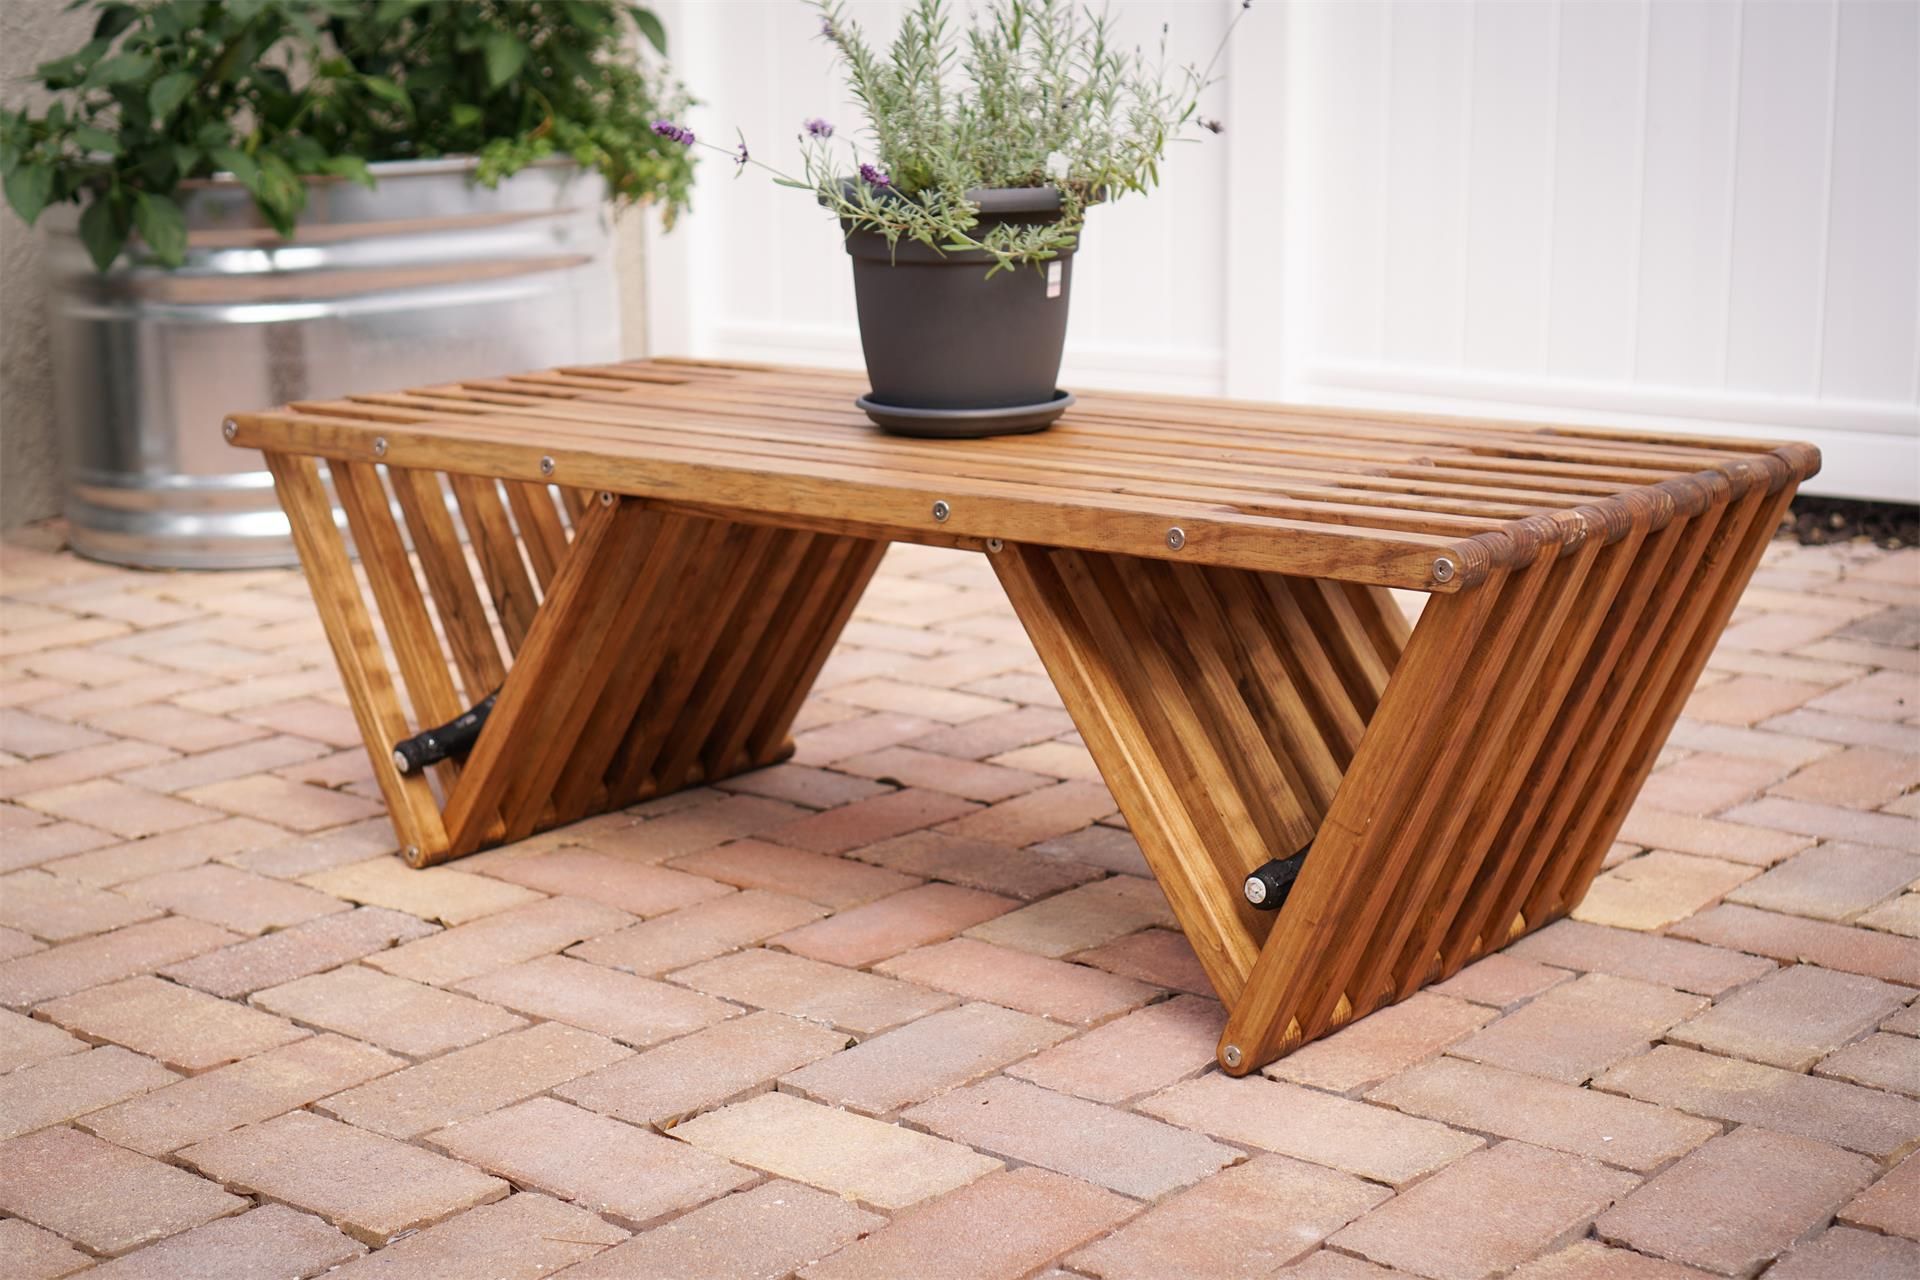 X36 Pine Wood Coffee Table From Eco Friendly Digs Within Wood Coffee Tables (View 14 of 15)